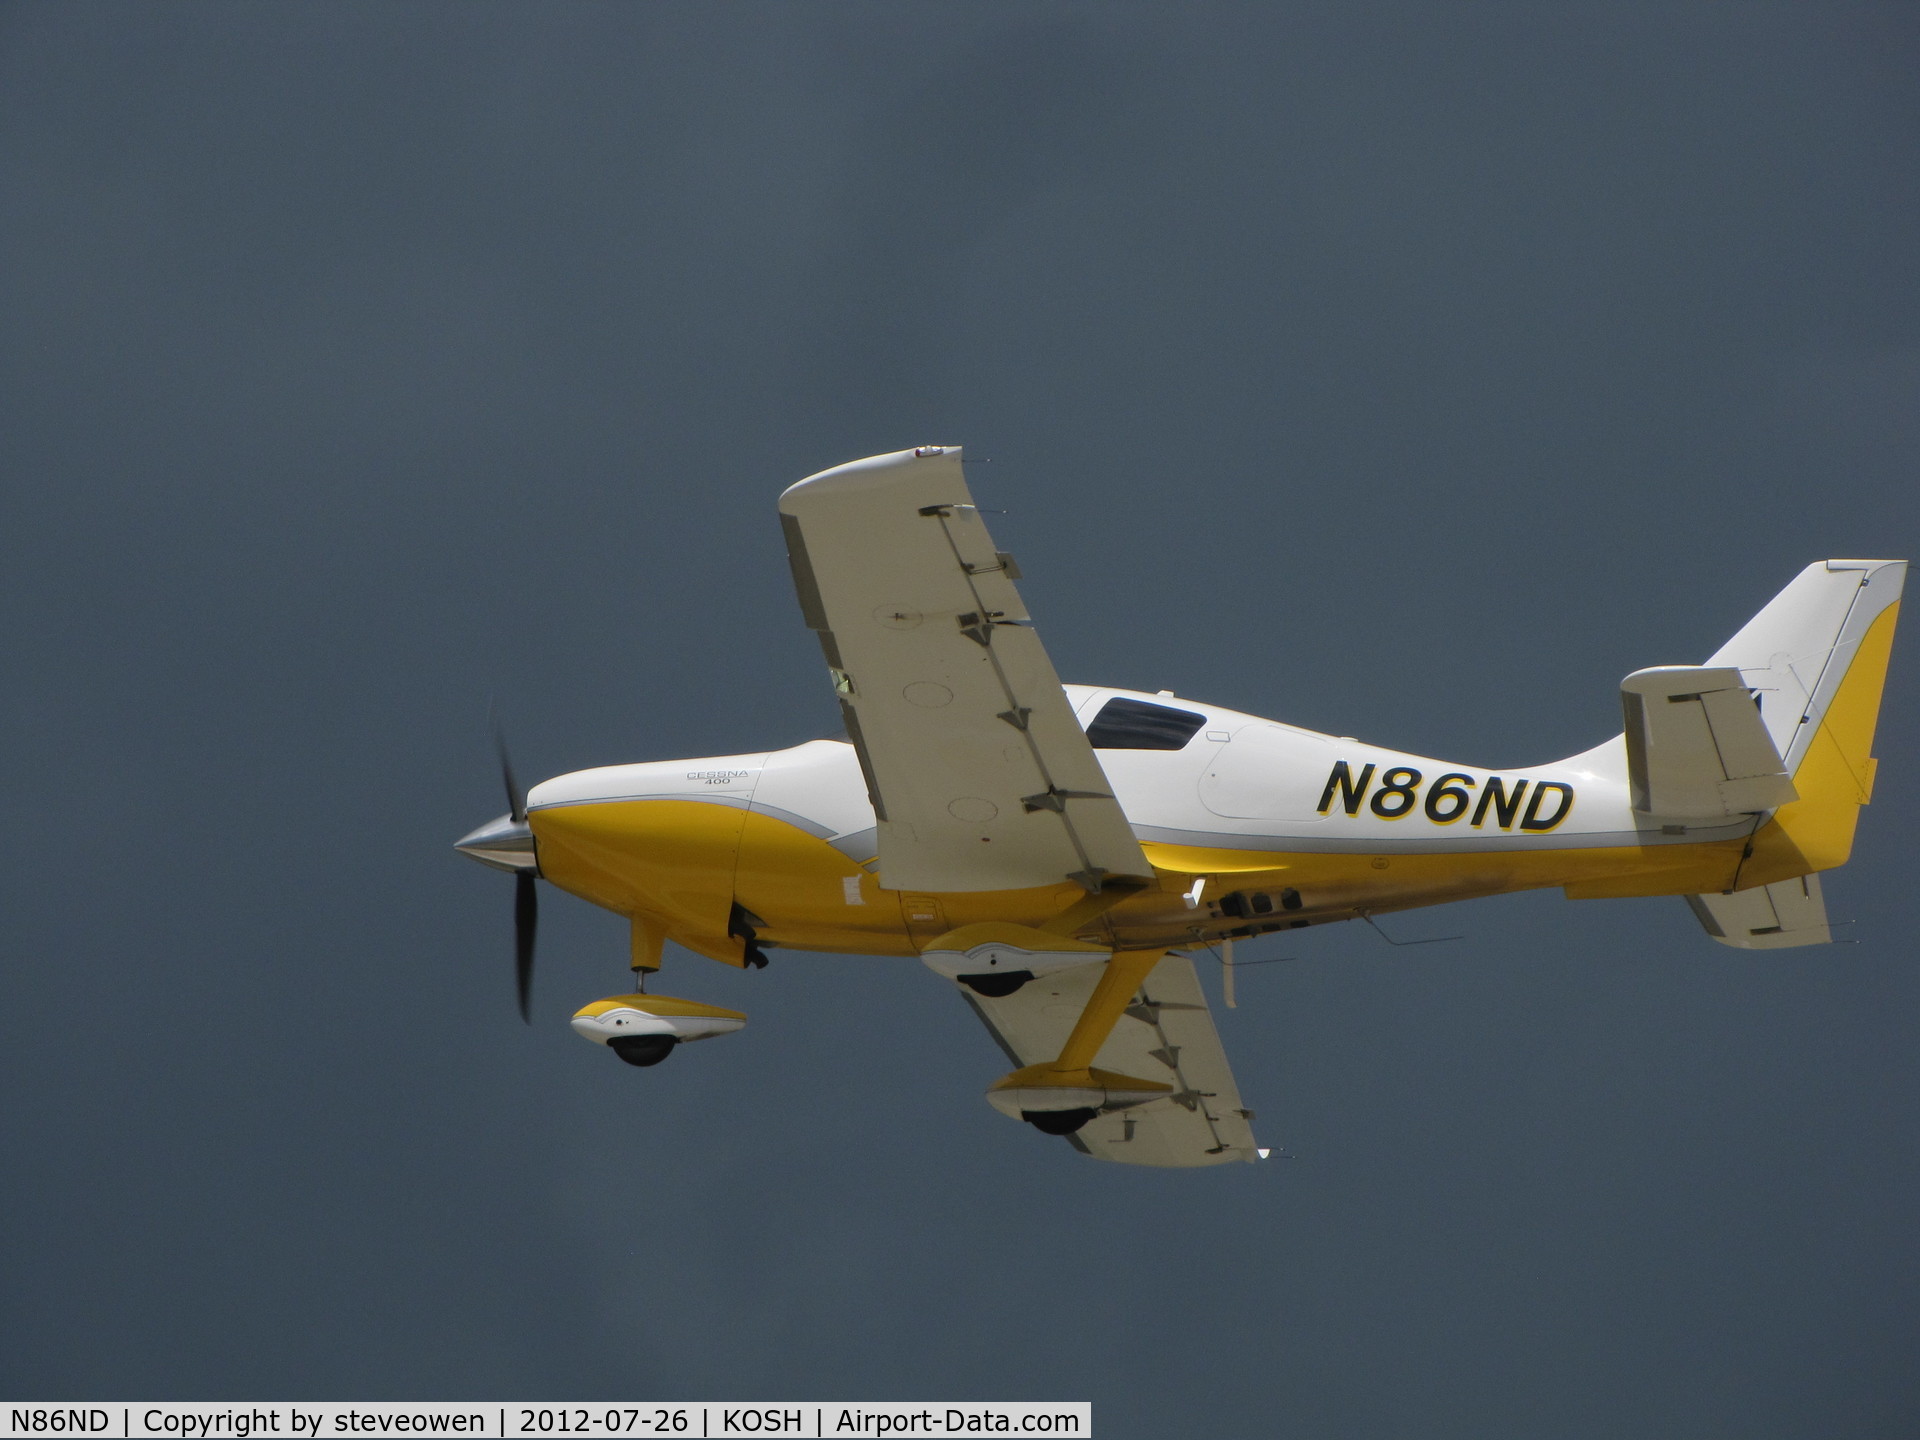 N86ND, 2008 Cessna LC41-550FG C/N 411080, heading into a stormy sky